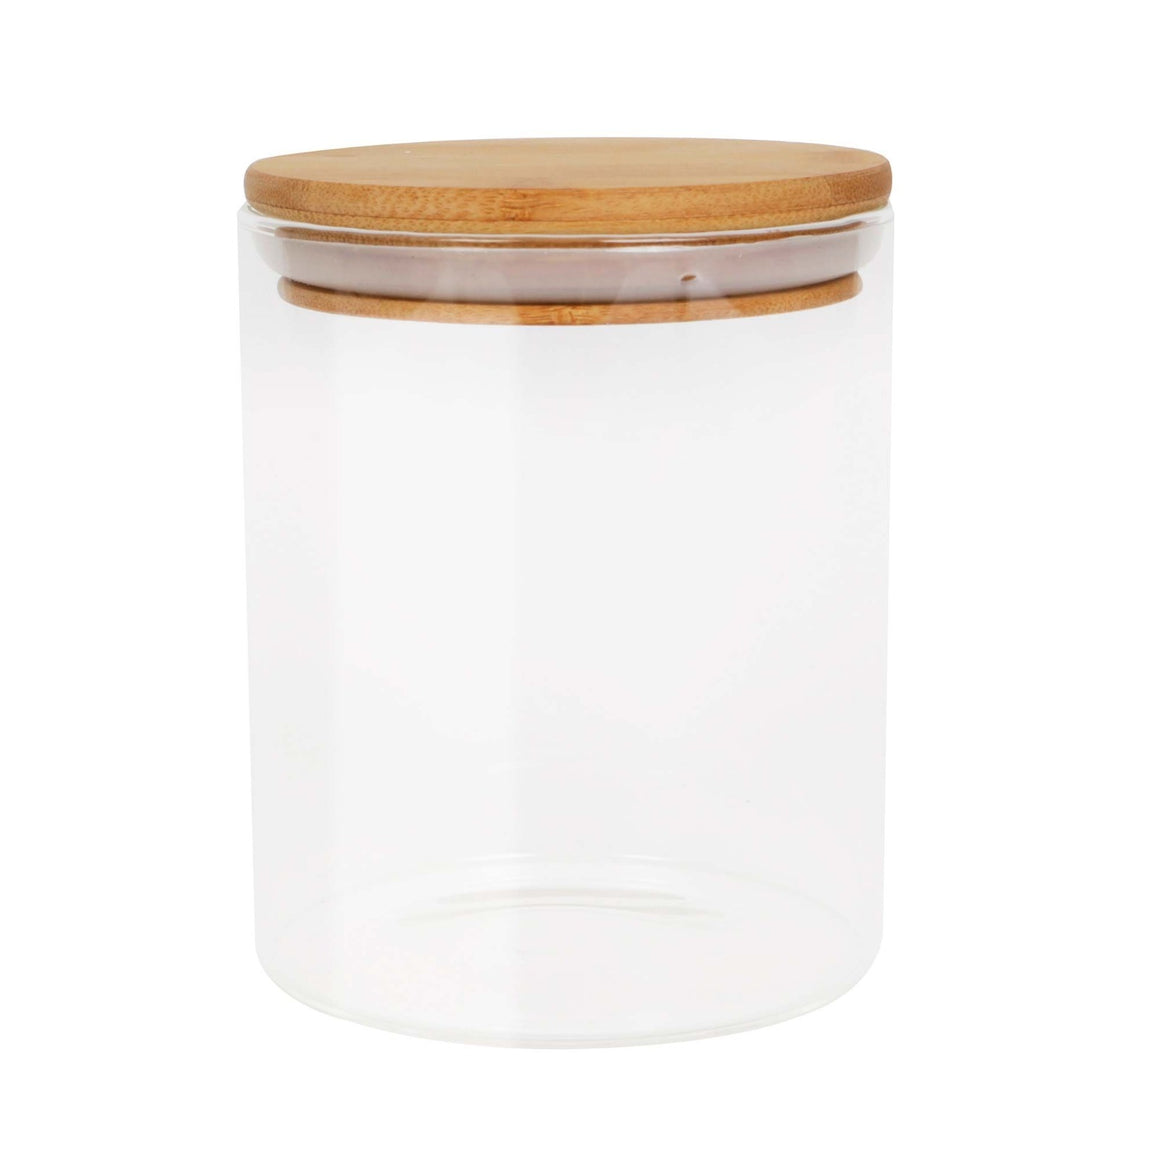 A Glass Jar 0.8L with a wooden lid.